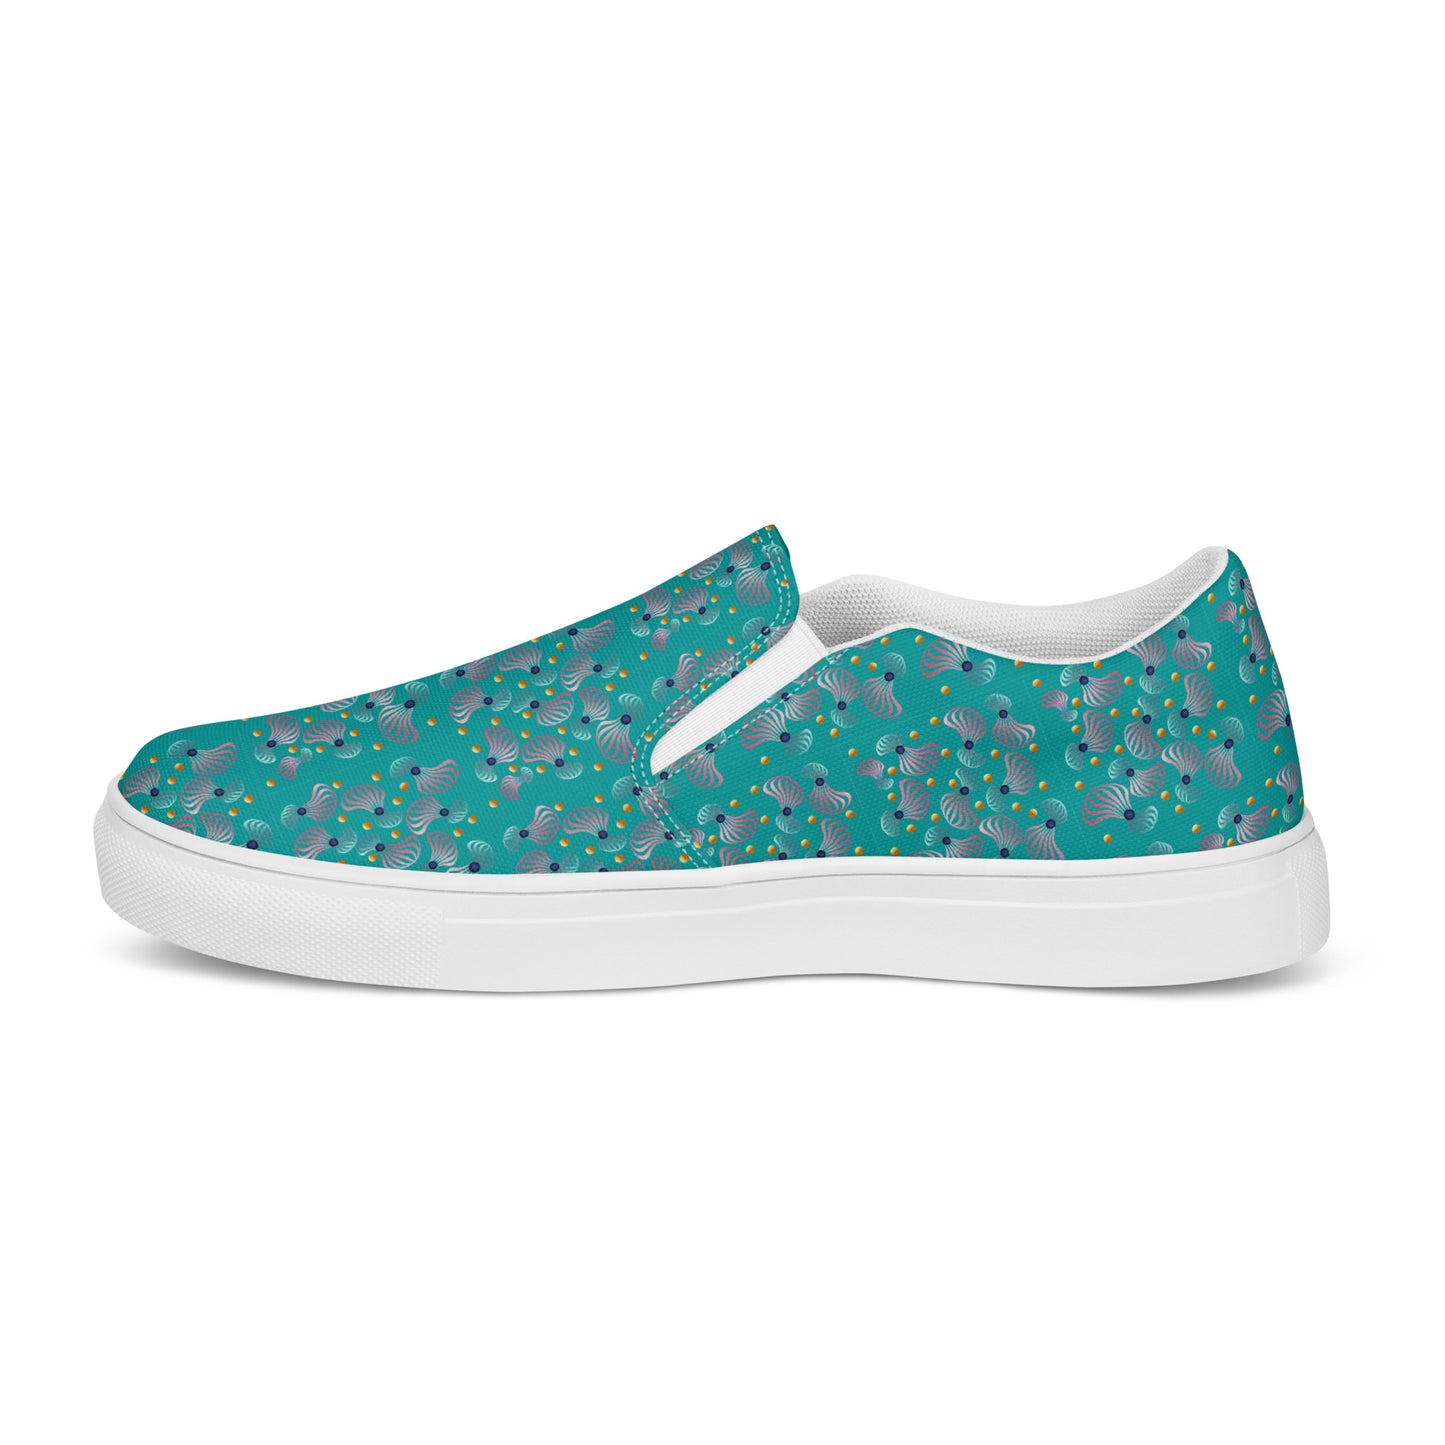 Women’s slip-on canvas shoes Kukloso Whimsical No 83 Pink/Aqua/Navy Spirials on Turquoise - Free Shipping